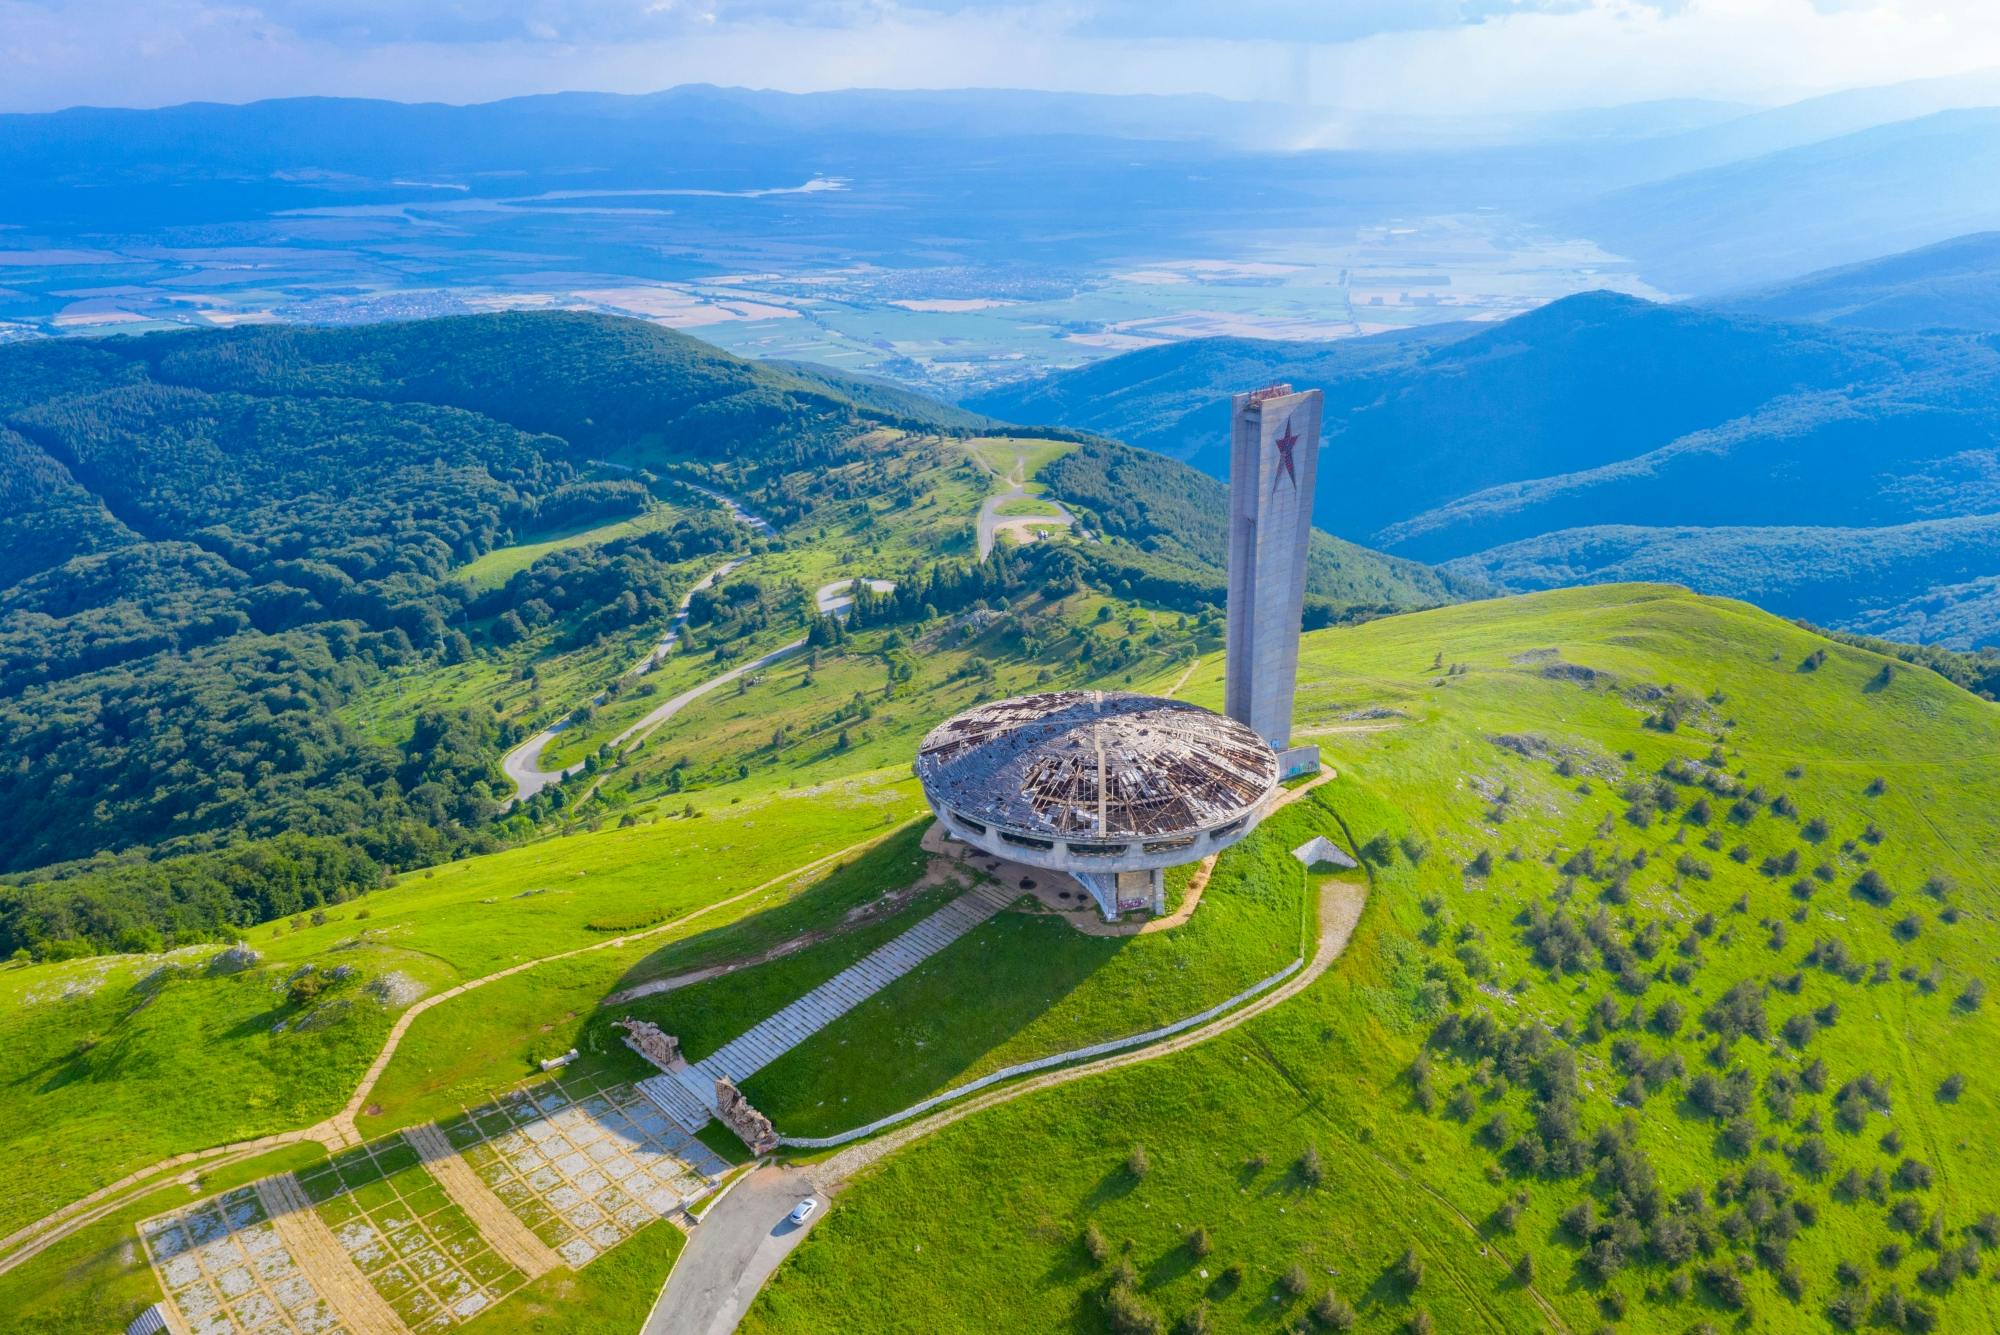 Full-day tour to Buzludzha Monument and the Valley of Roses from Sofia